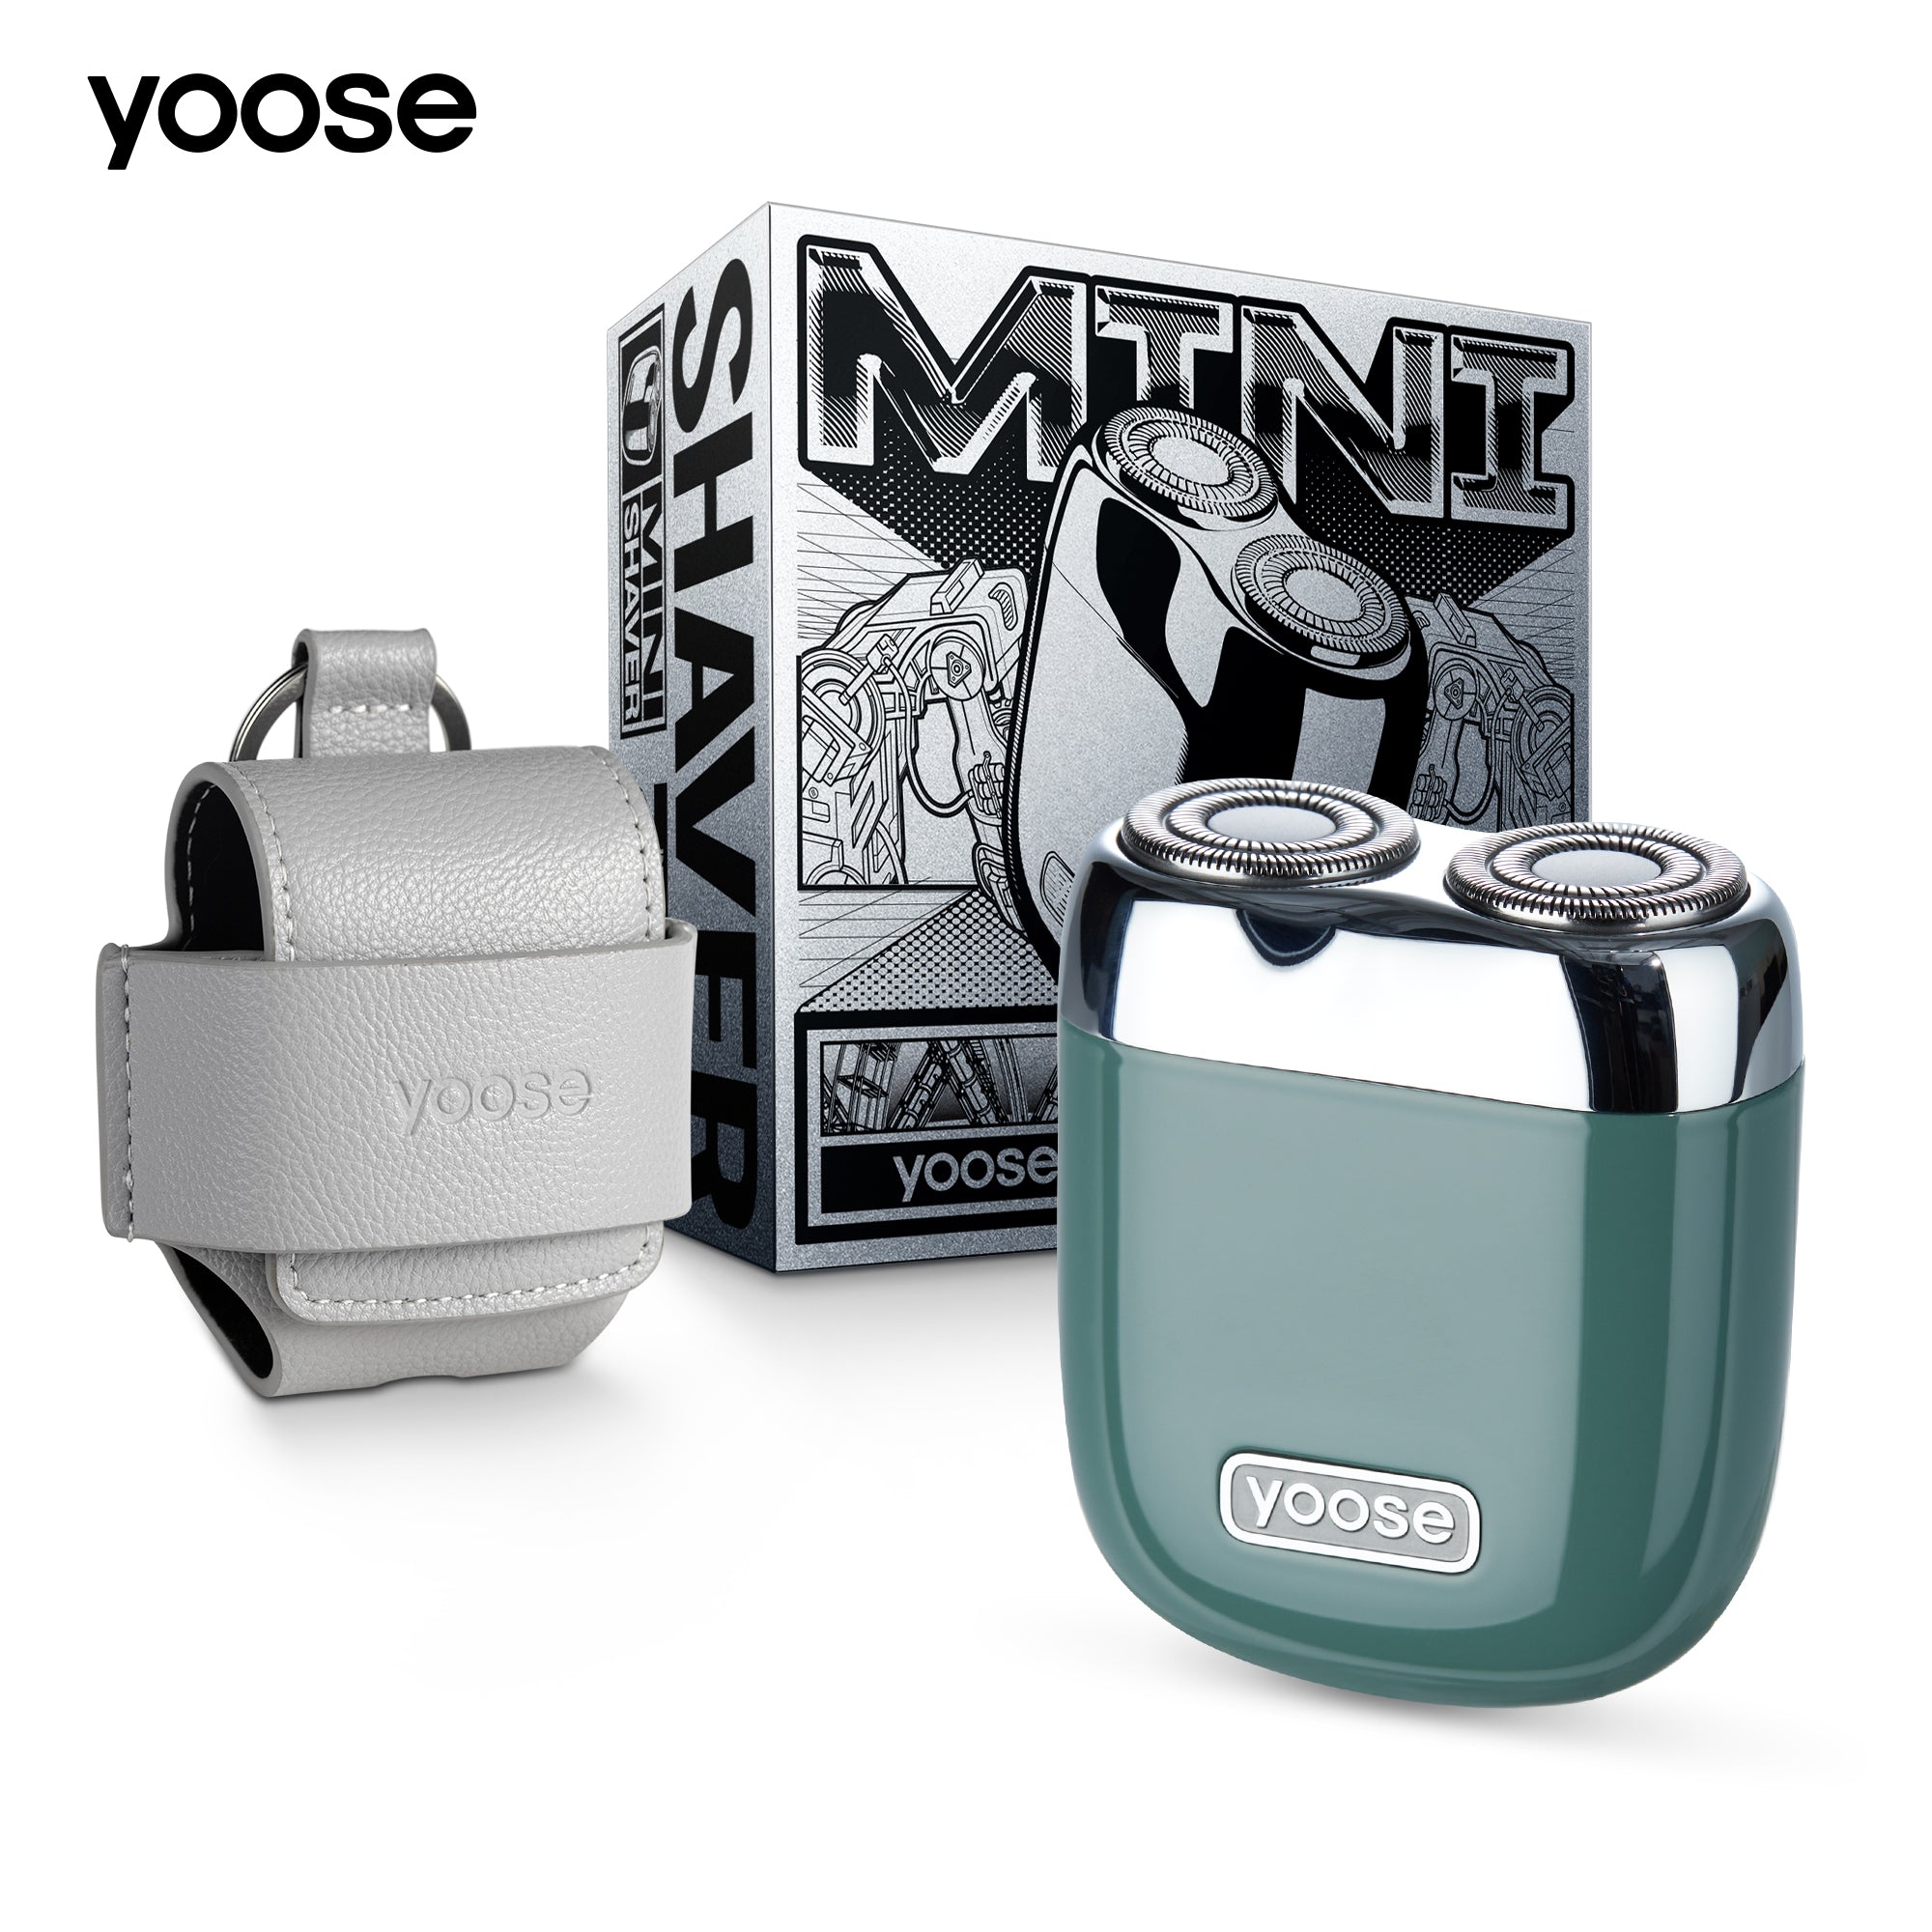 yoose MINI Rotary shaver-Alloy made-German Imported & Extra replacement head